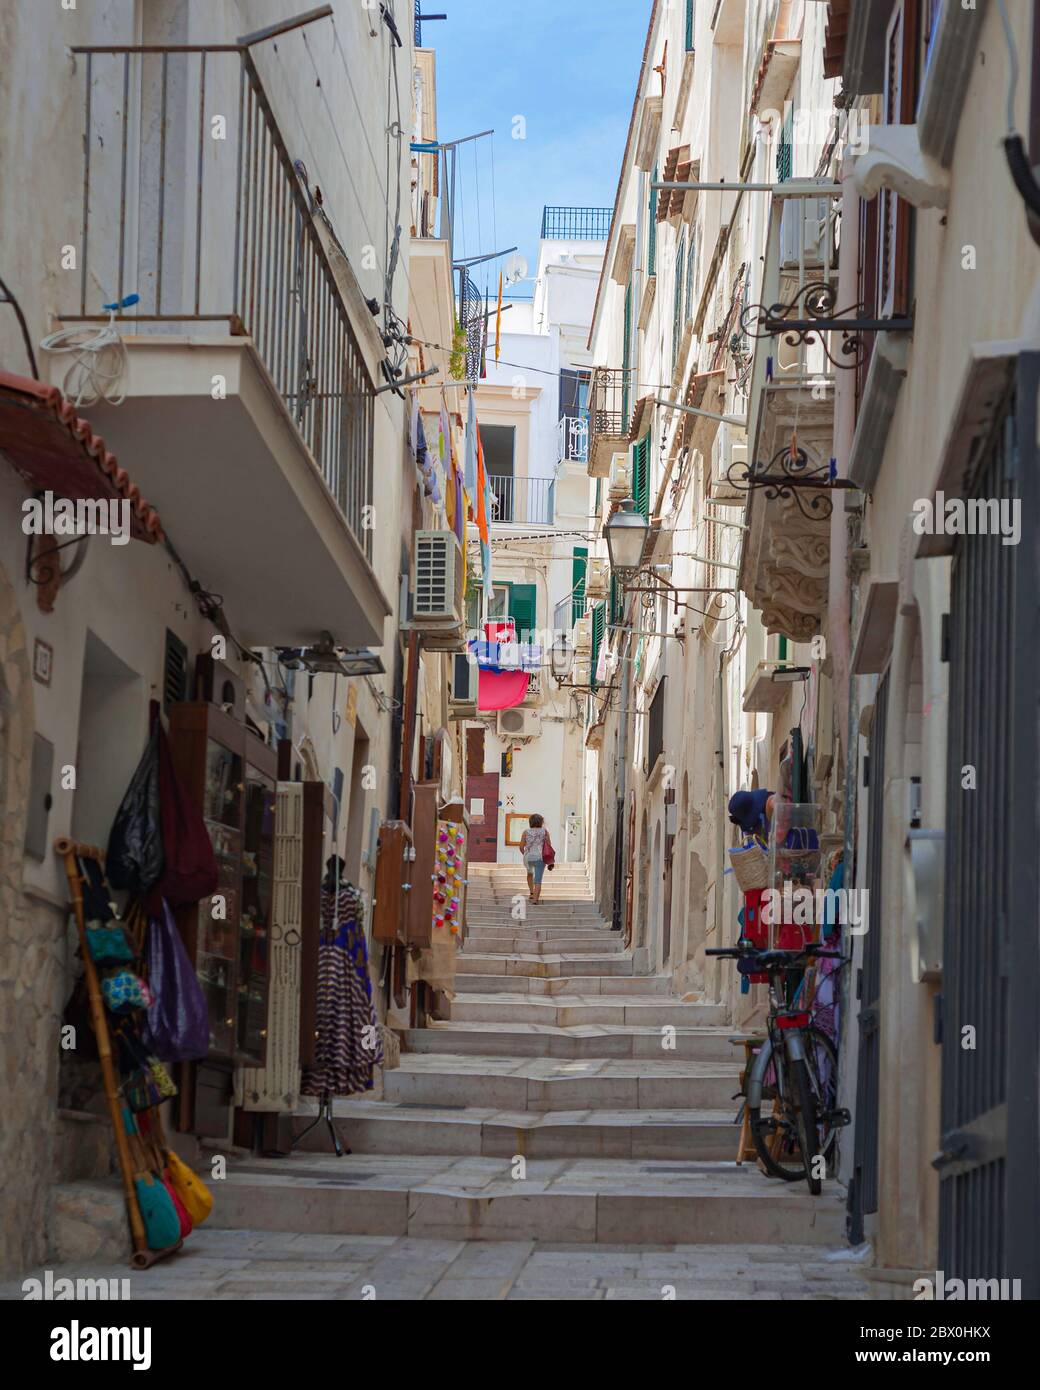 Narrow idyllic streets in ancient Vieste, a small fishing town along the Adriatic Sea in the puglia region of Italy. Stock Photo